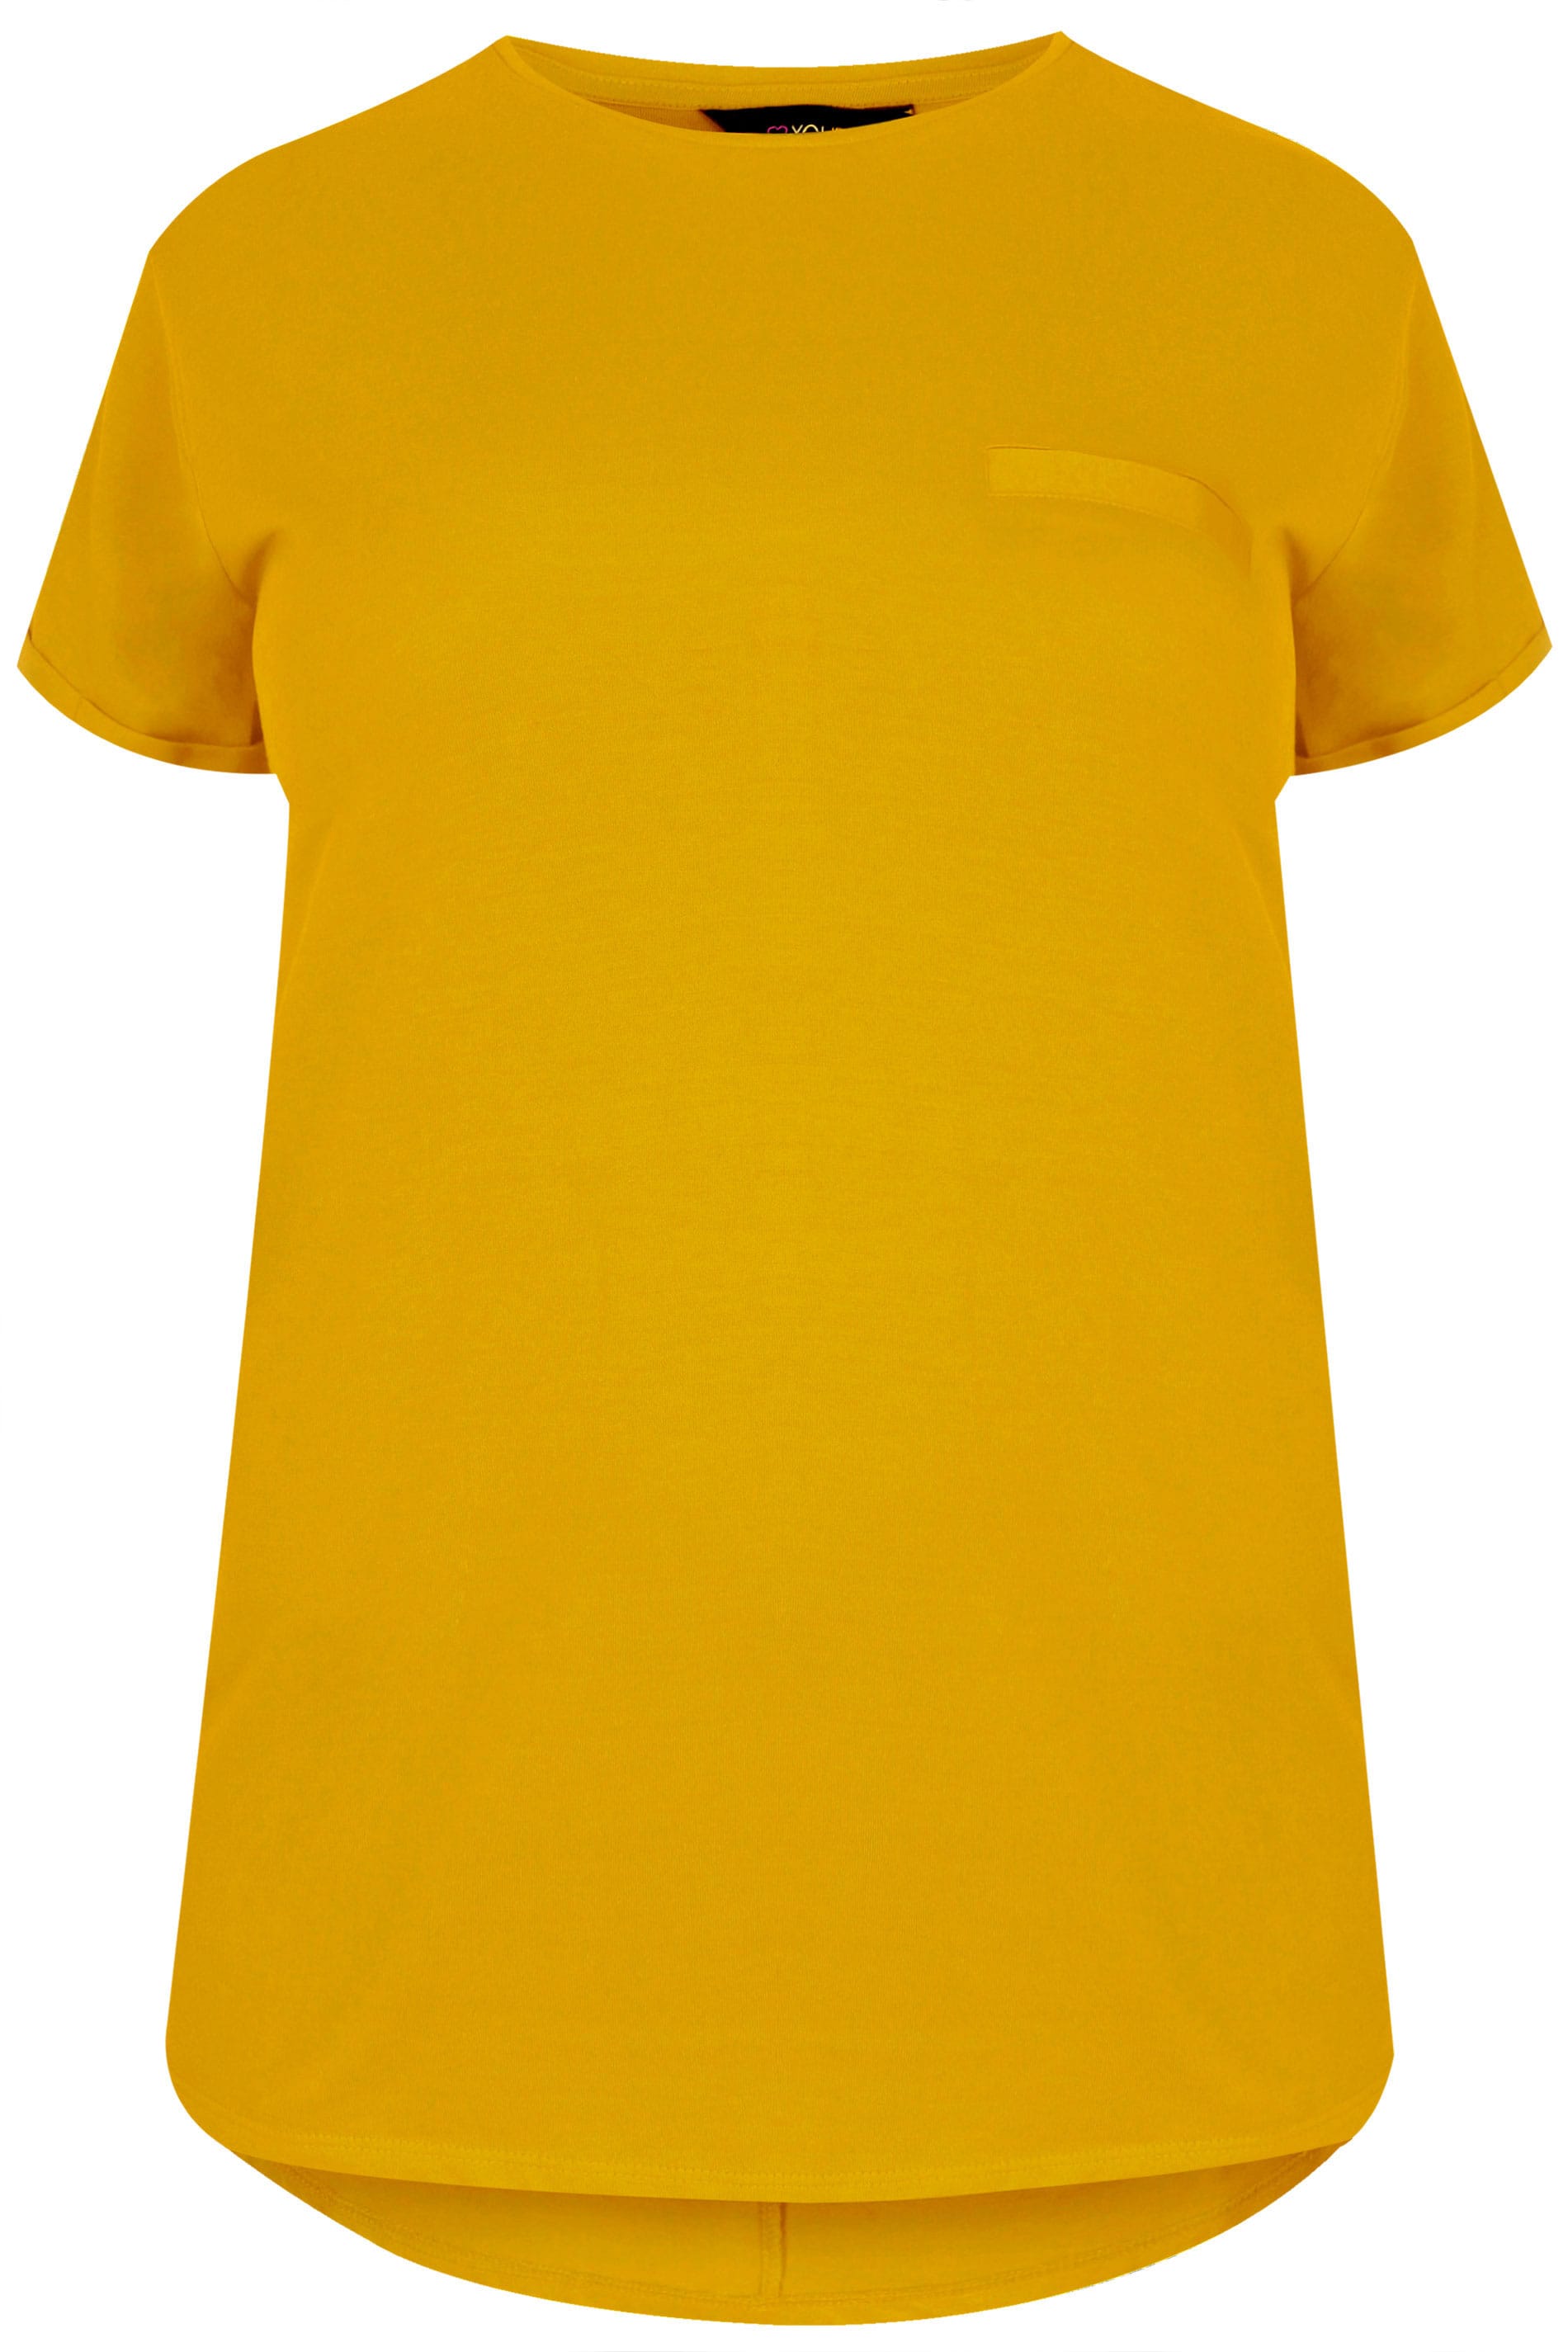 Download Mustard Yellow Mock Pocket T-Shirt With Curved Hem, plus ...